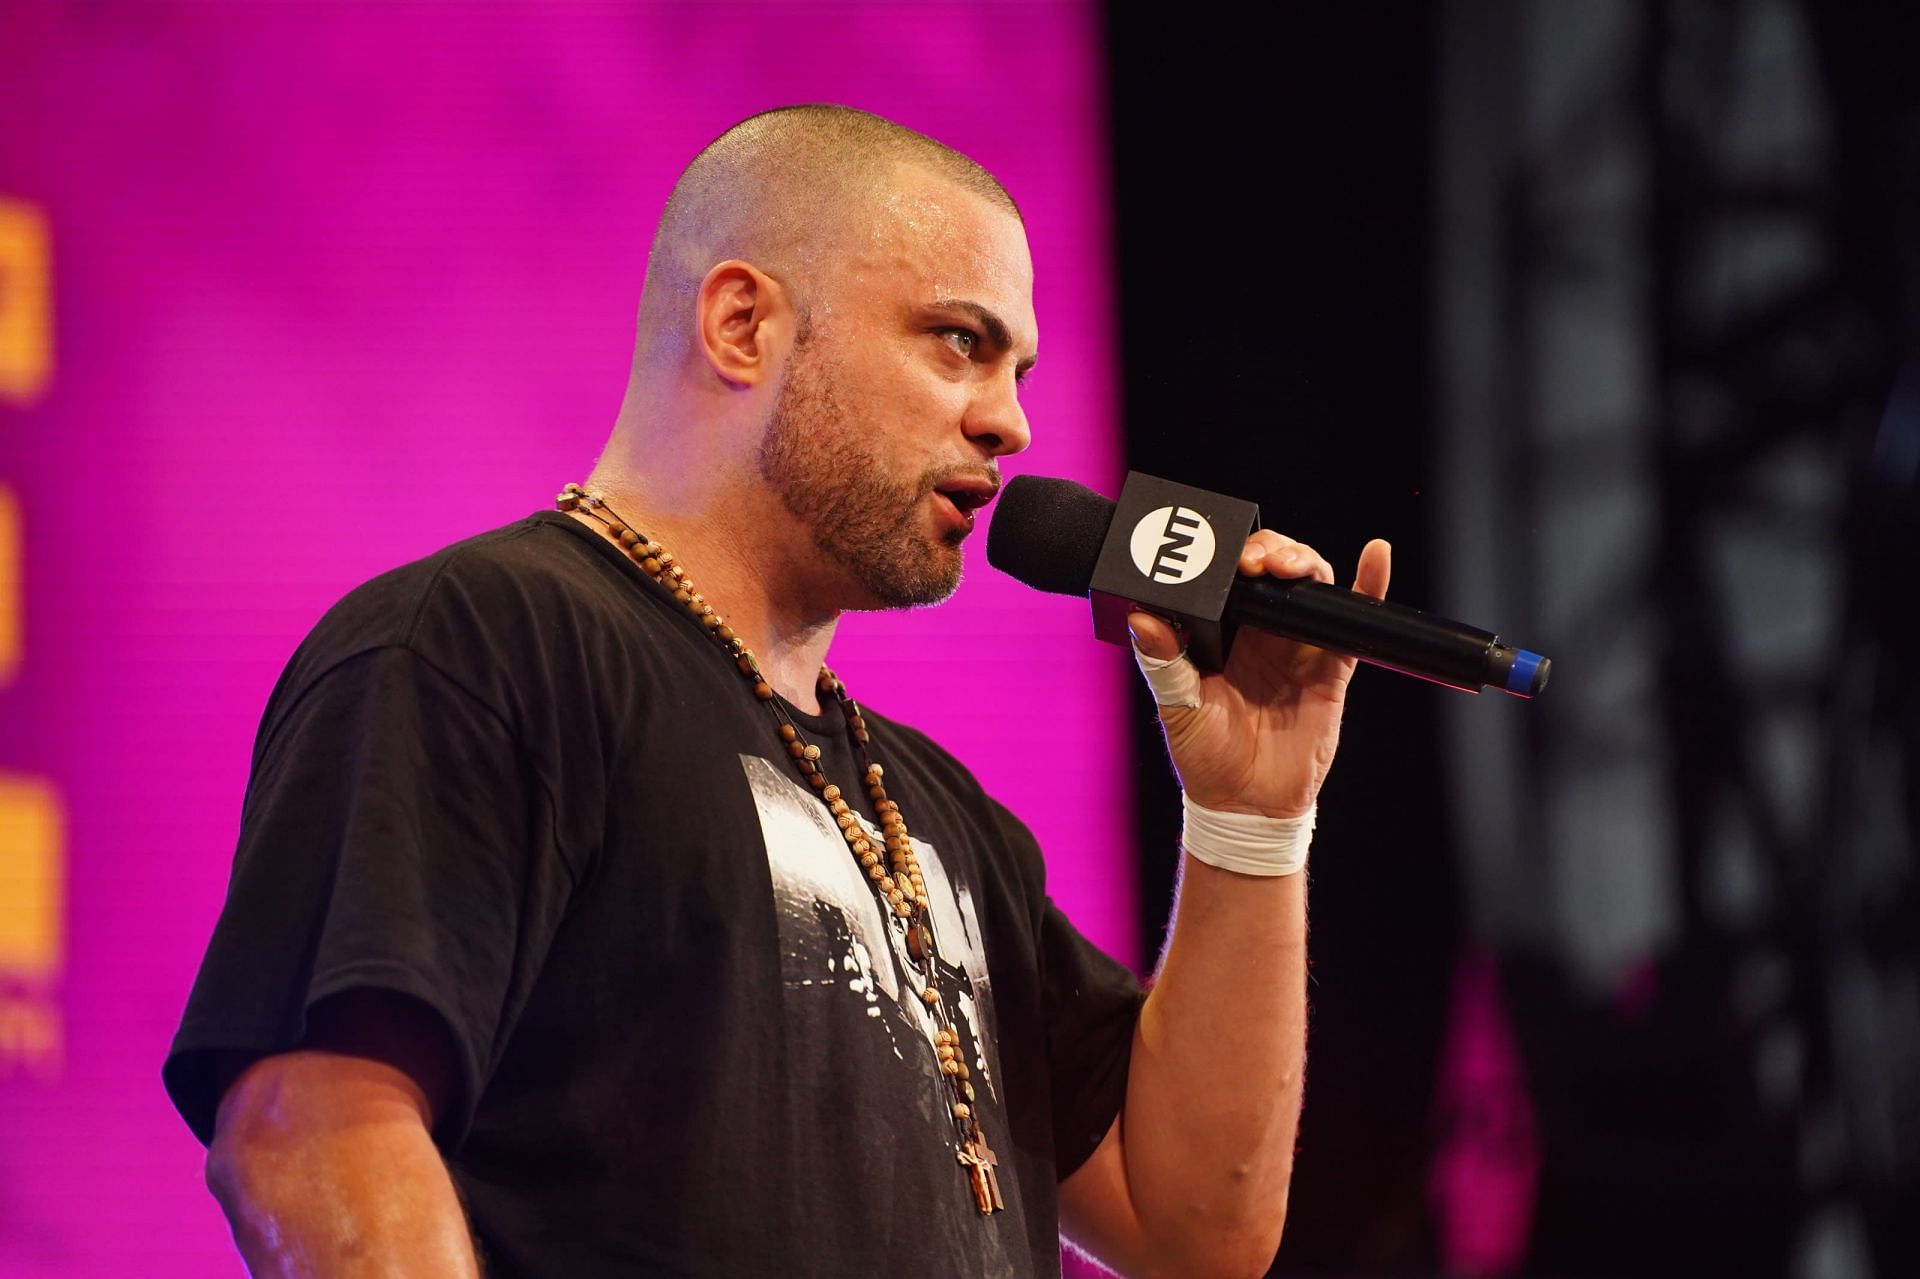 Eddie Kingston has been absent from AEW TV due to an injury.